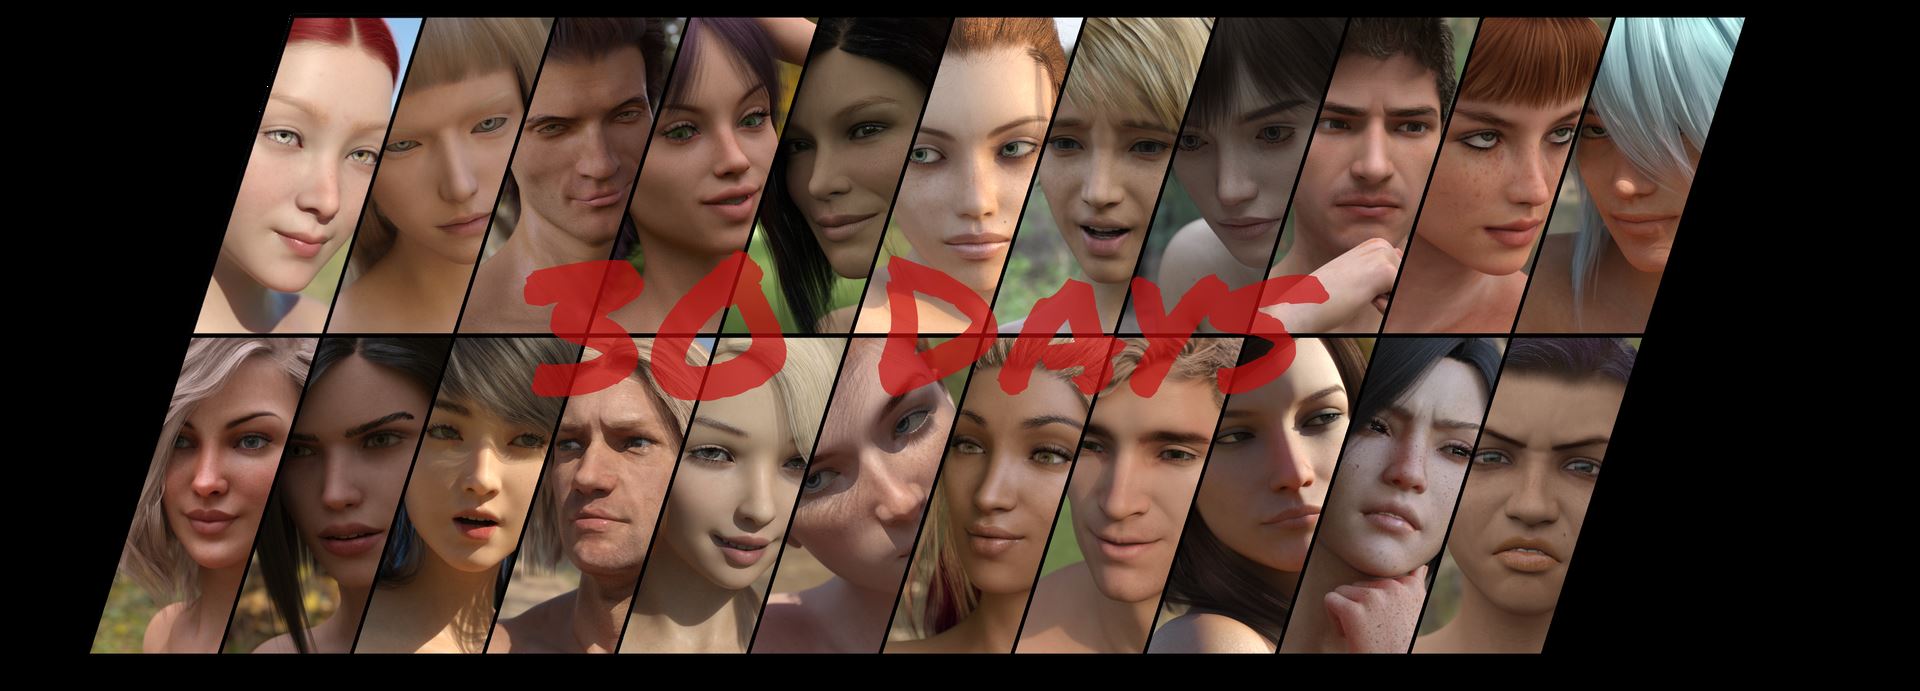 30 Days porn xxx game download cover